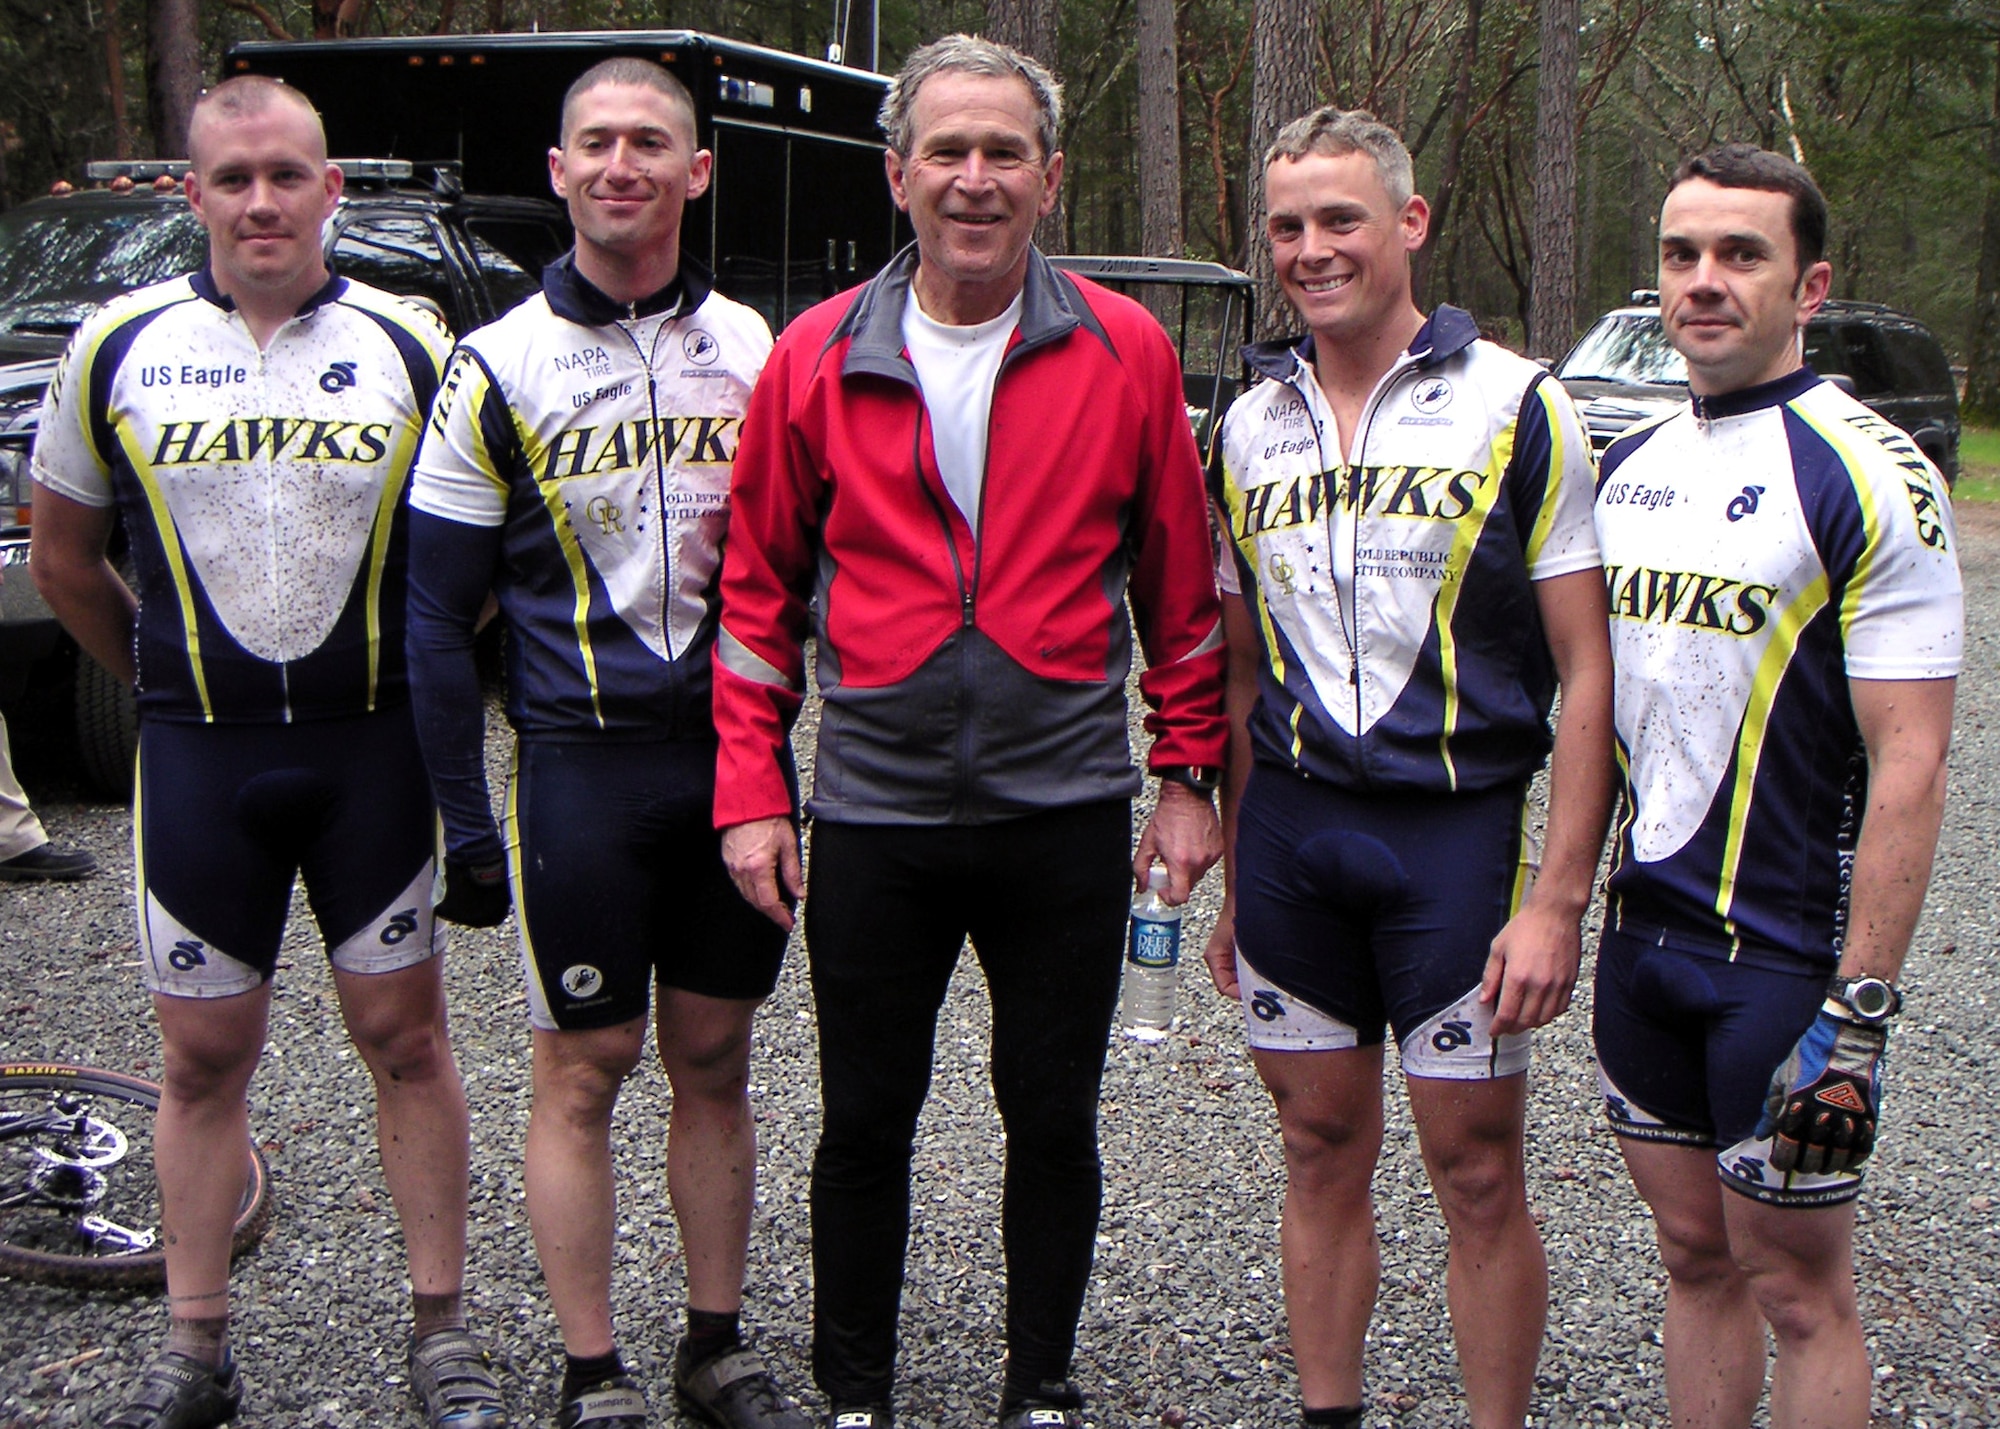 (Left to right) Staff Sgt. Brian Young, Capt. James Weinstein, President George W. Bush, 1st Lt. Barton Boma and Staff Sgt. Dustin Diede take a break after completing a bike ride through Los Posados Park in Napa County, Calif., on Saturday, April 22, 2006.  The president invited the four Airmen -- members of the Hawks Mountain Bike Club at Travis Air Force Base, Calif. -- to ride with him during his visit to Northern California.  (Courtesy photo/1st Lt. Barton Boma)   